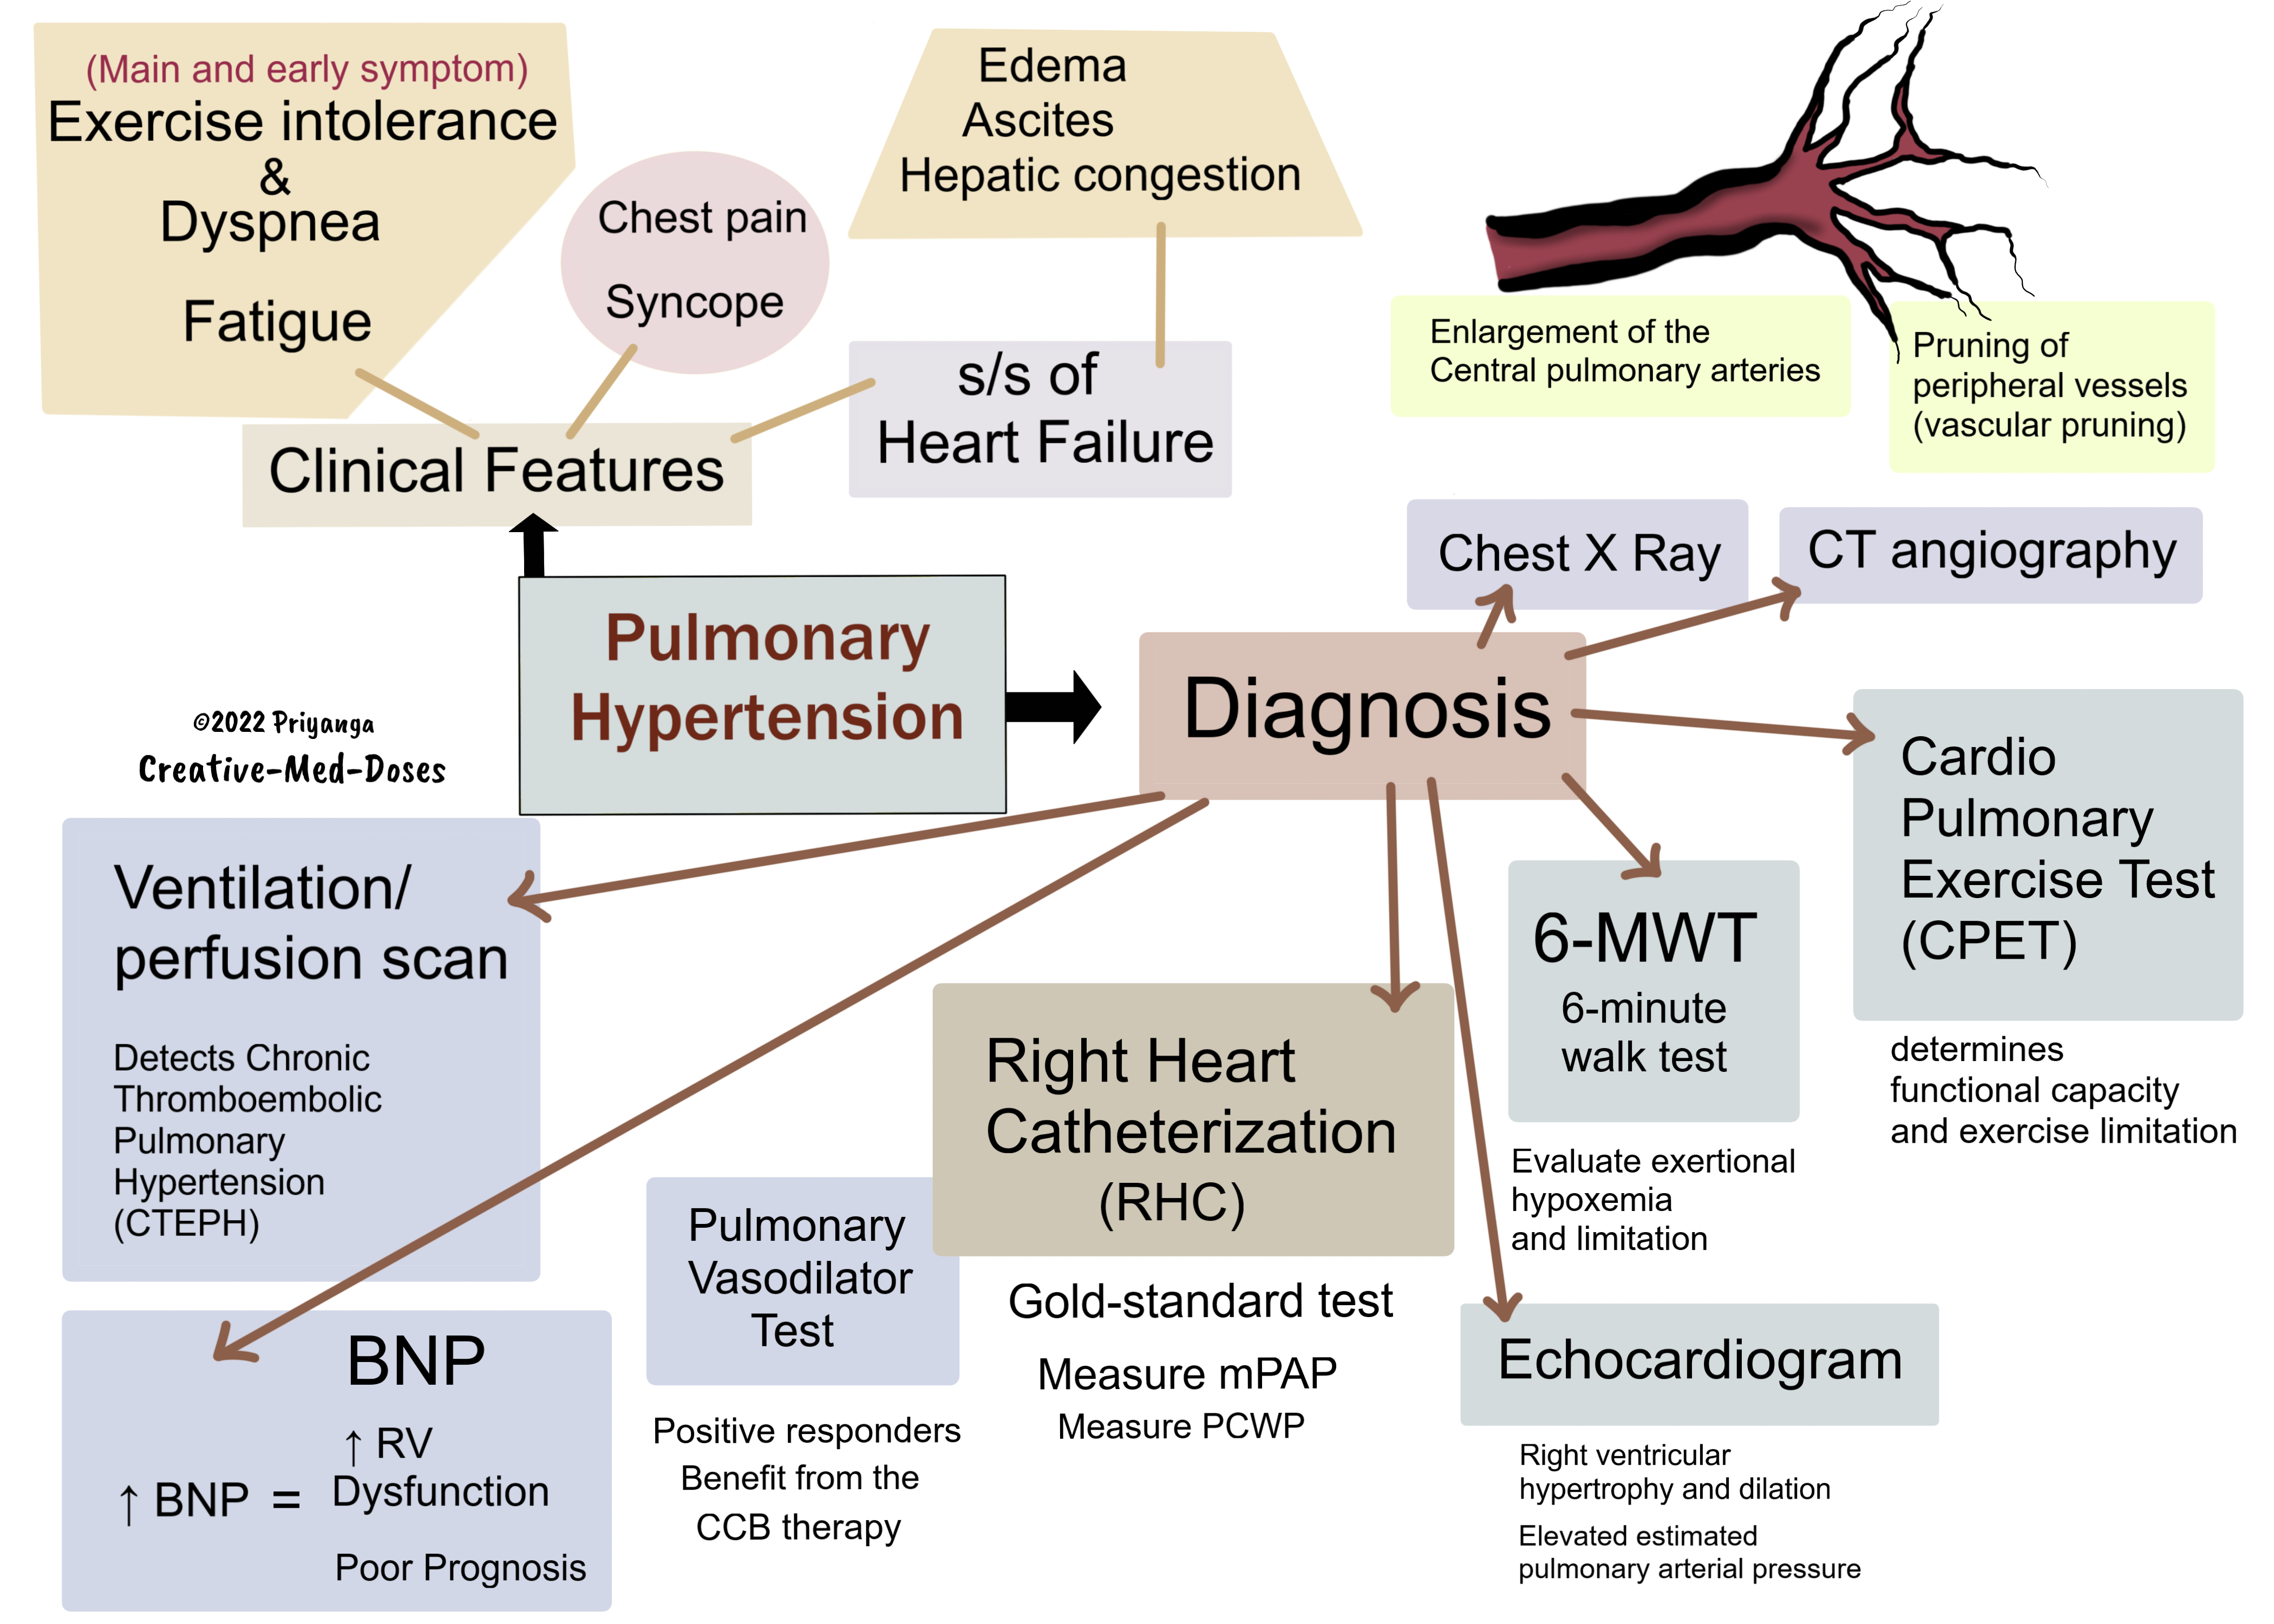 Pulmonary Hypertension: Diagnosis and Clinical Features 